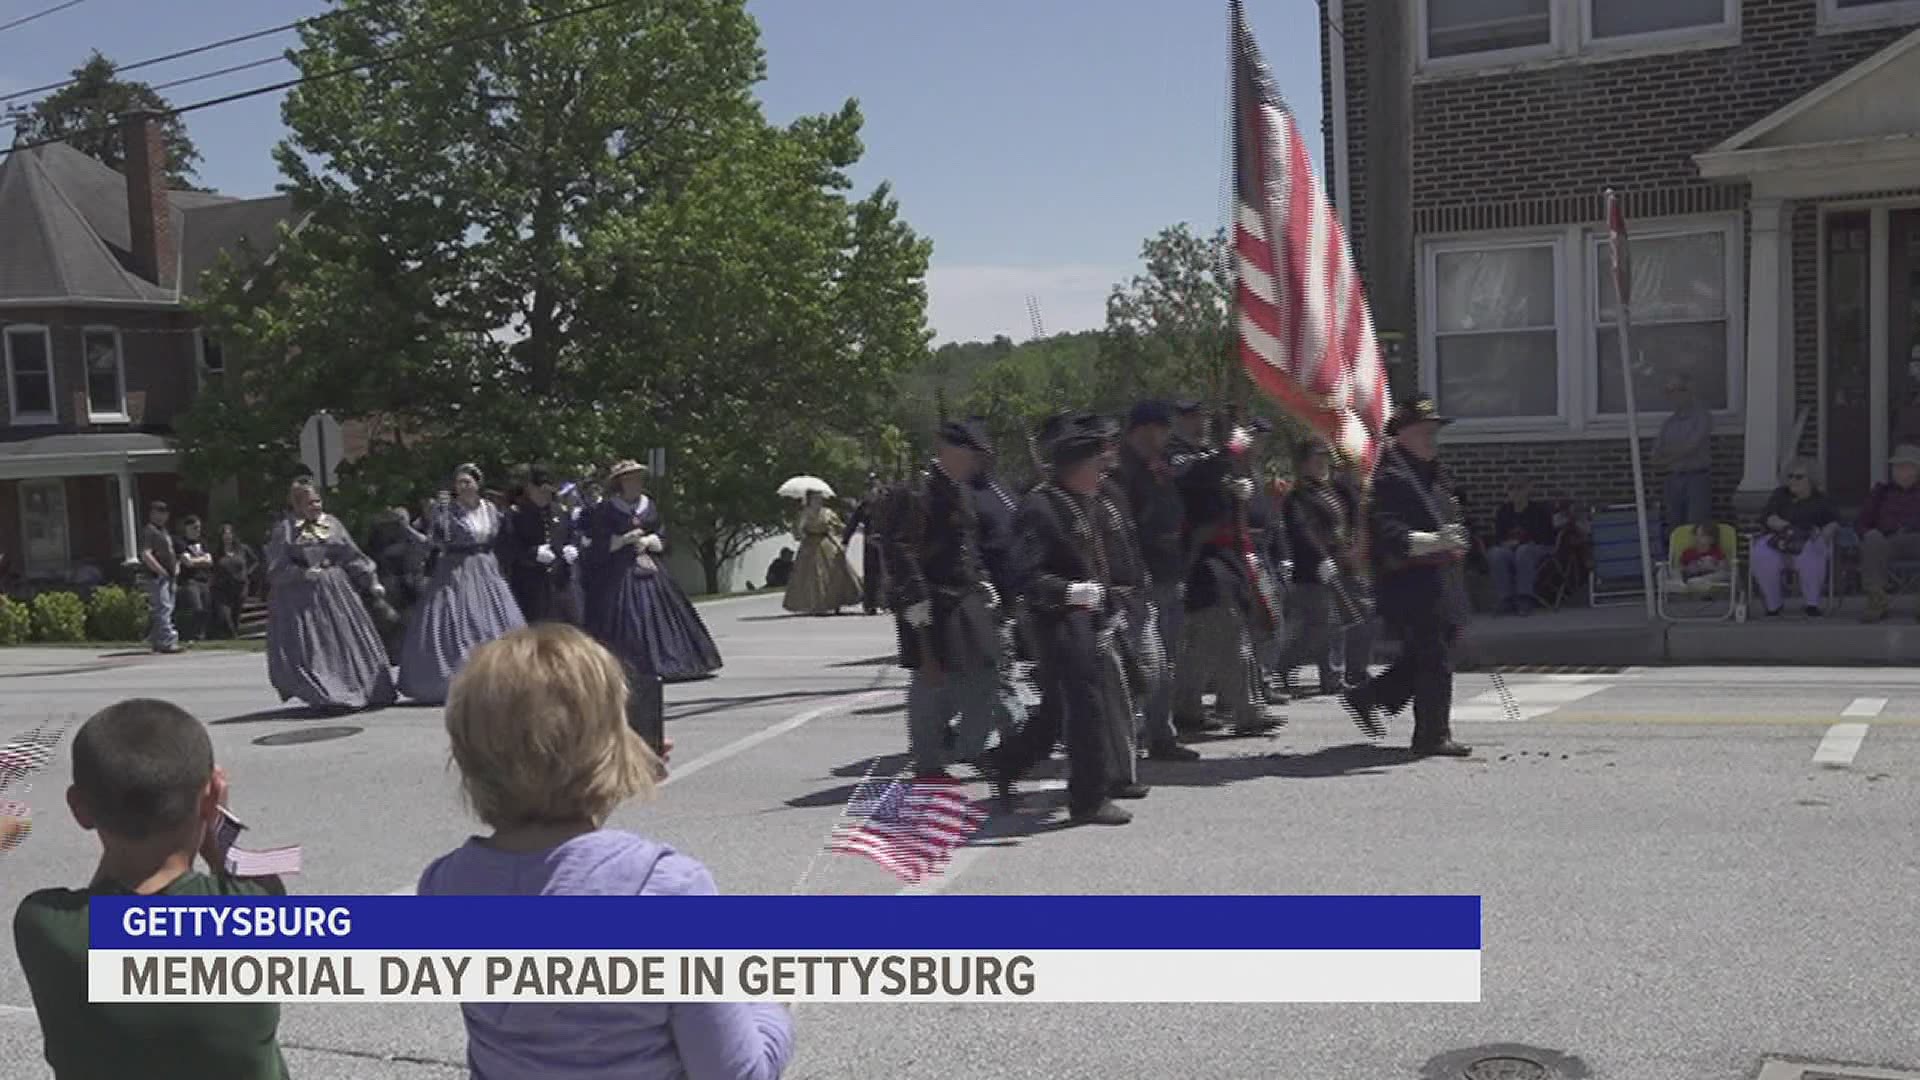 Memorial Day celebrations continue in Gettysburg